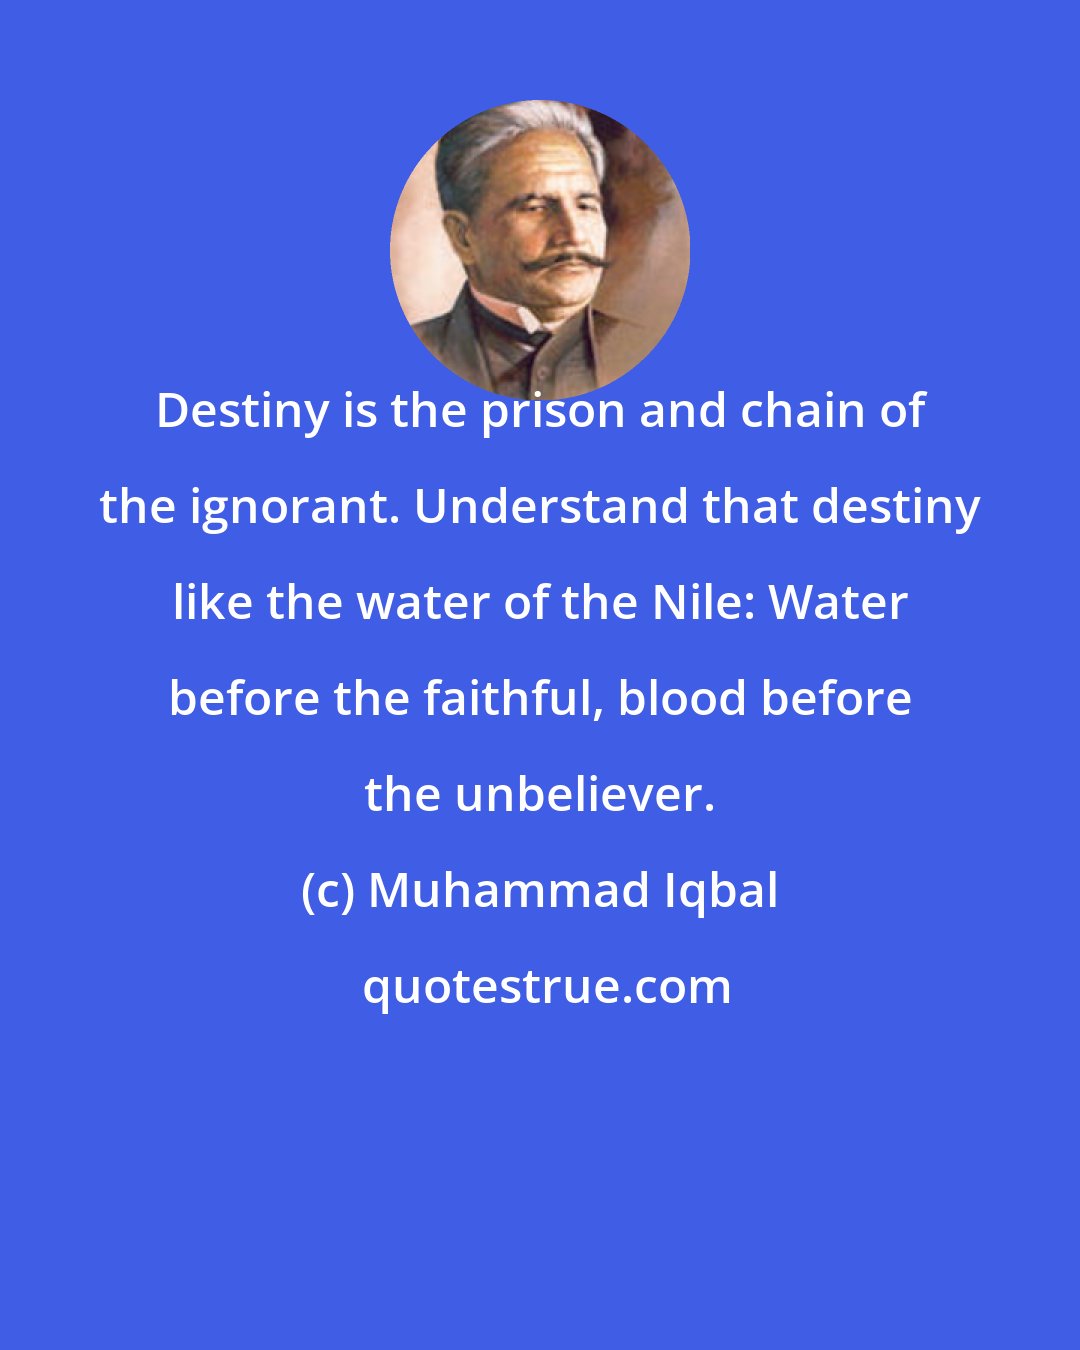 Muhammad Iqbal: Destiny is the prison and chain of the ignorant. Understand that destiny like the water of the Nile: Water before the faithful, blood before the unbeliever.